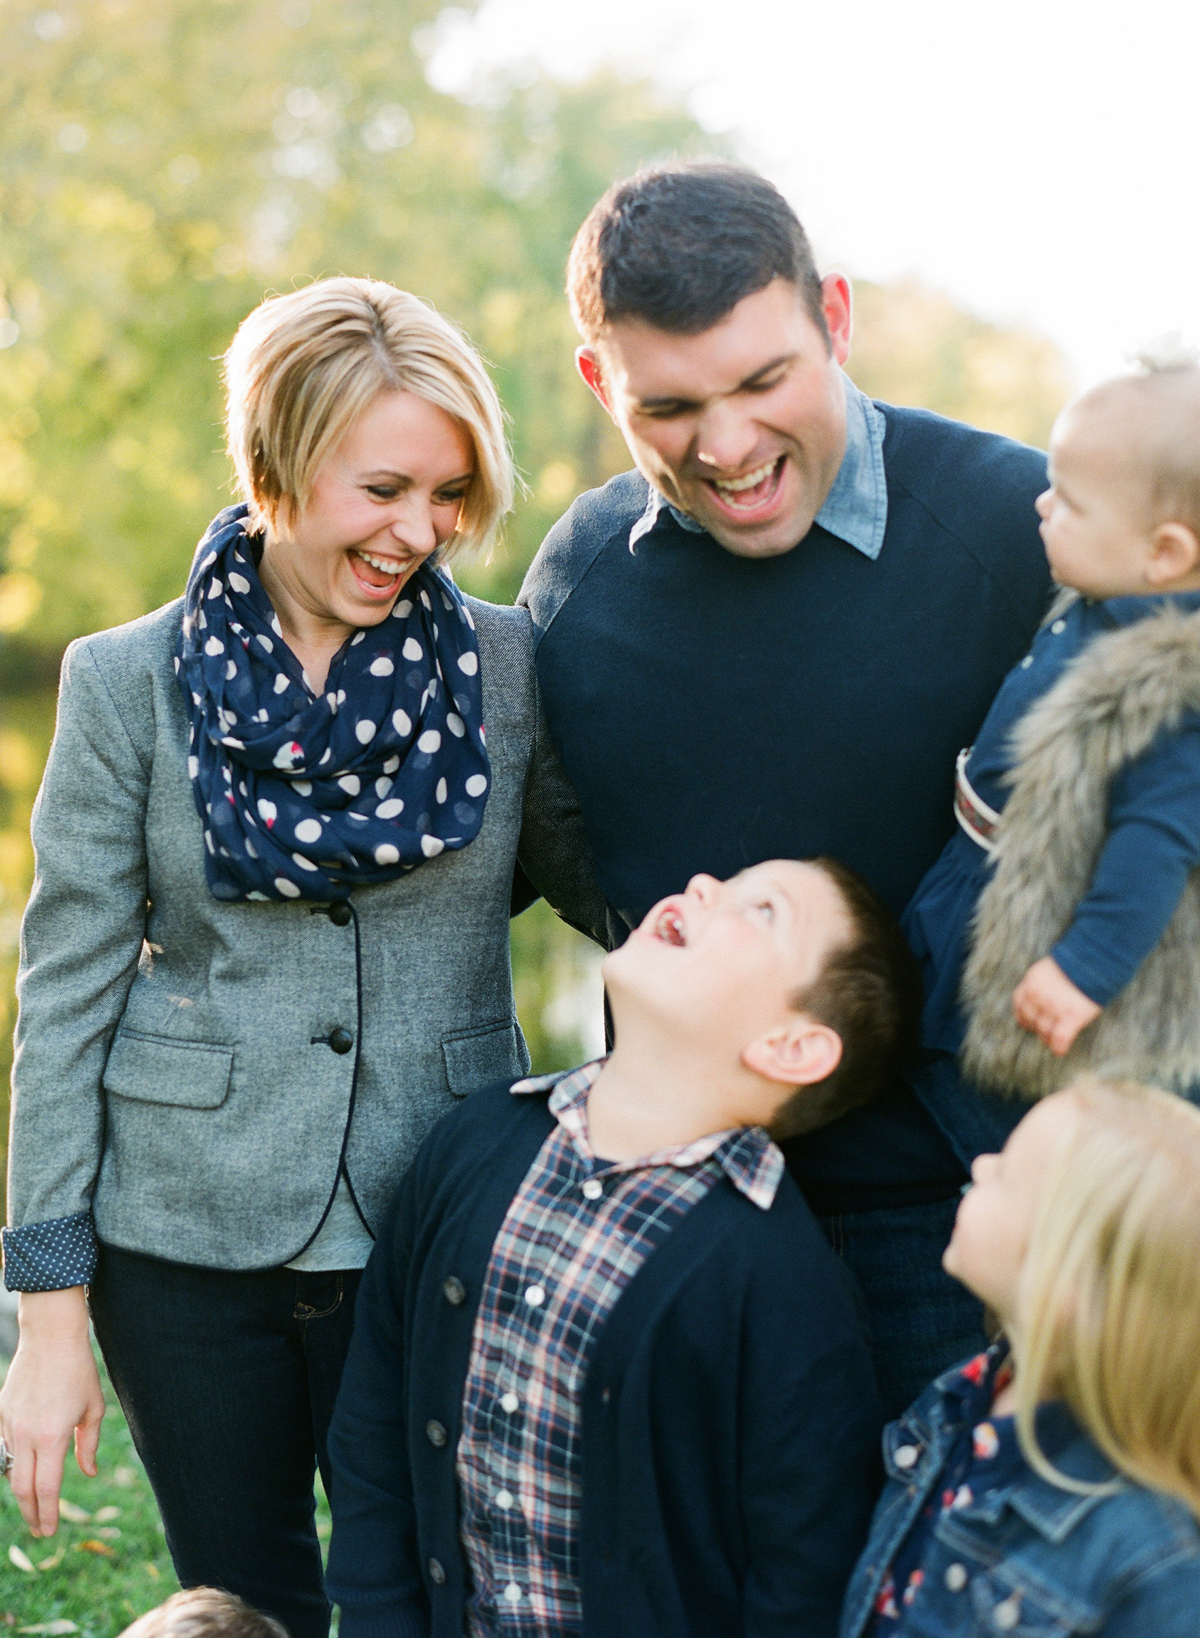 "wisconsin family photography", "wausau family photographer"